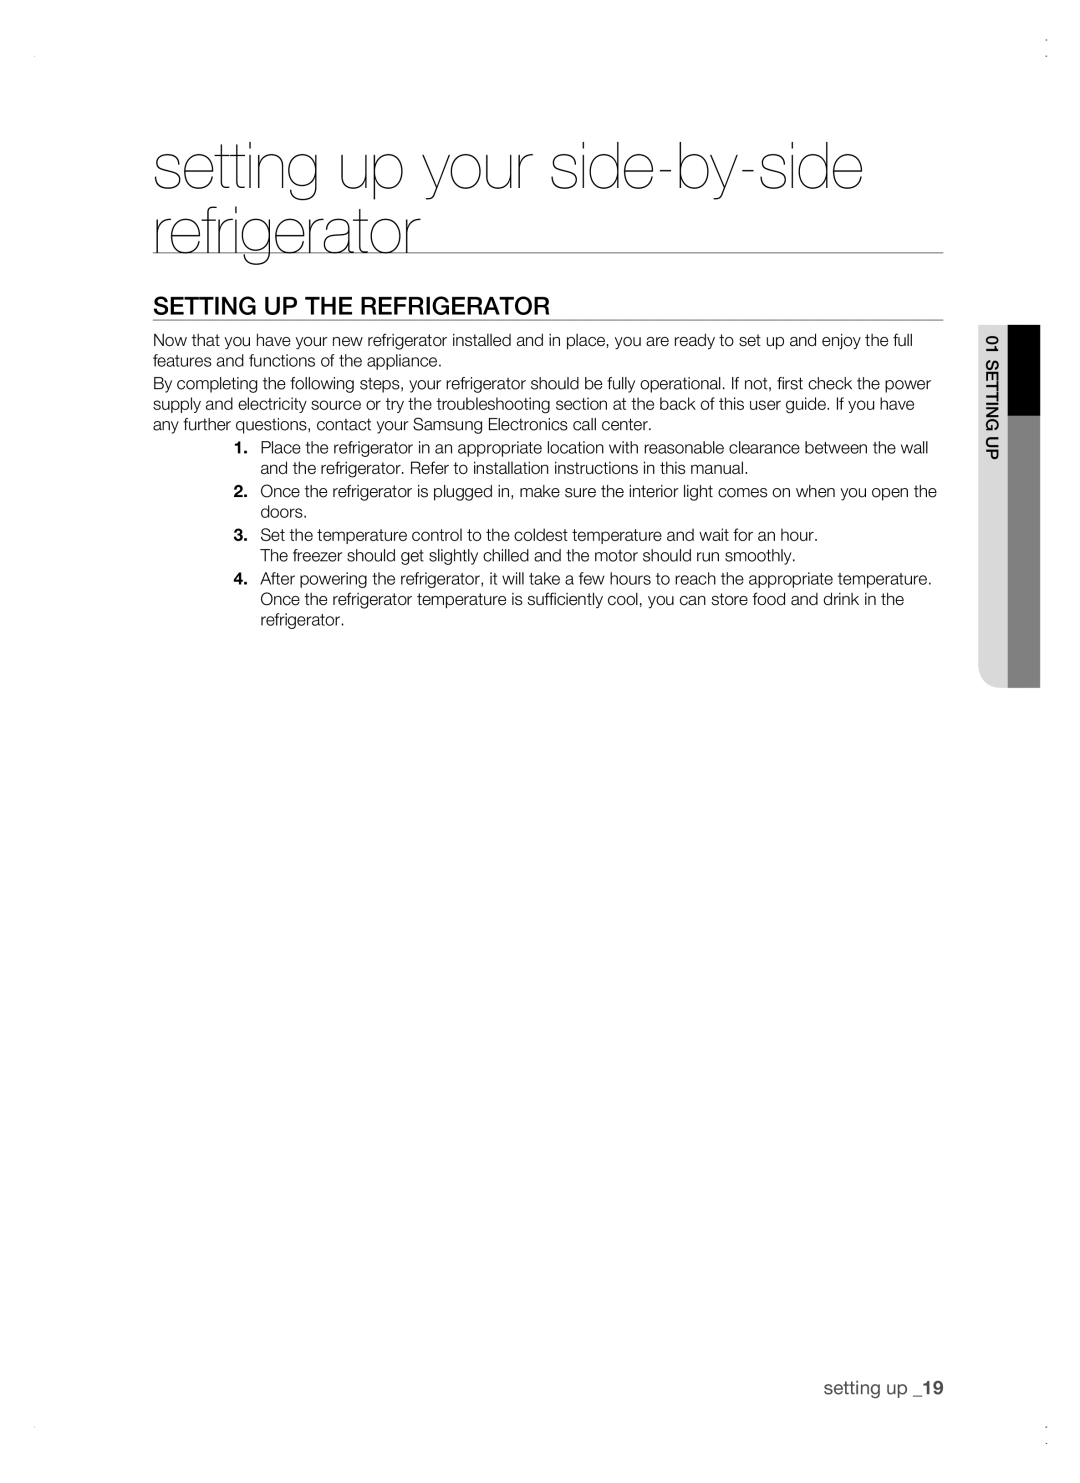 Samsung RSG5 user manual Setting up the refrigerator, setting up your side-by-side refrigerator 